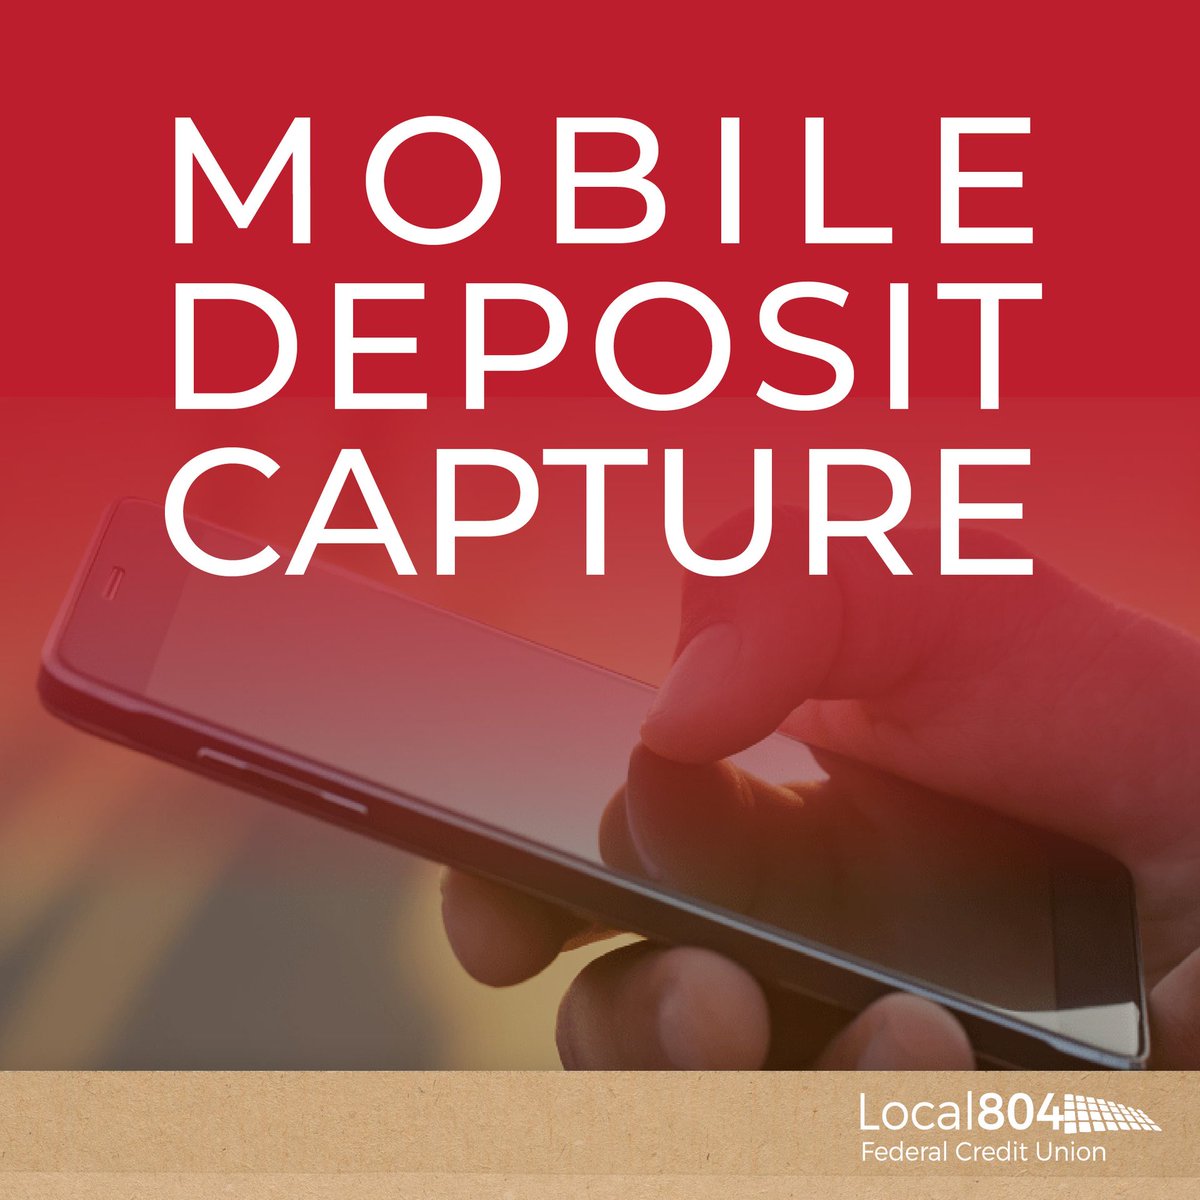 Make deposits anytime, anywhere with Mobile 804 Deposits. Learn more bit.ly/3vw4CH9

#TeamstersLocal804 #Teamsters #UPS #local447IAMAW @Teamsters_Local_804 @804_Local